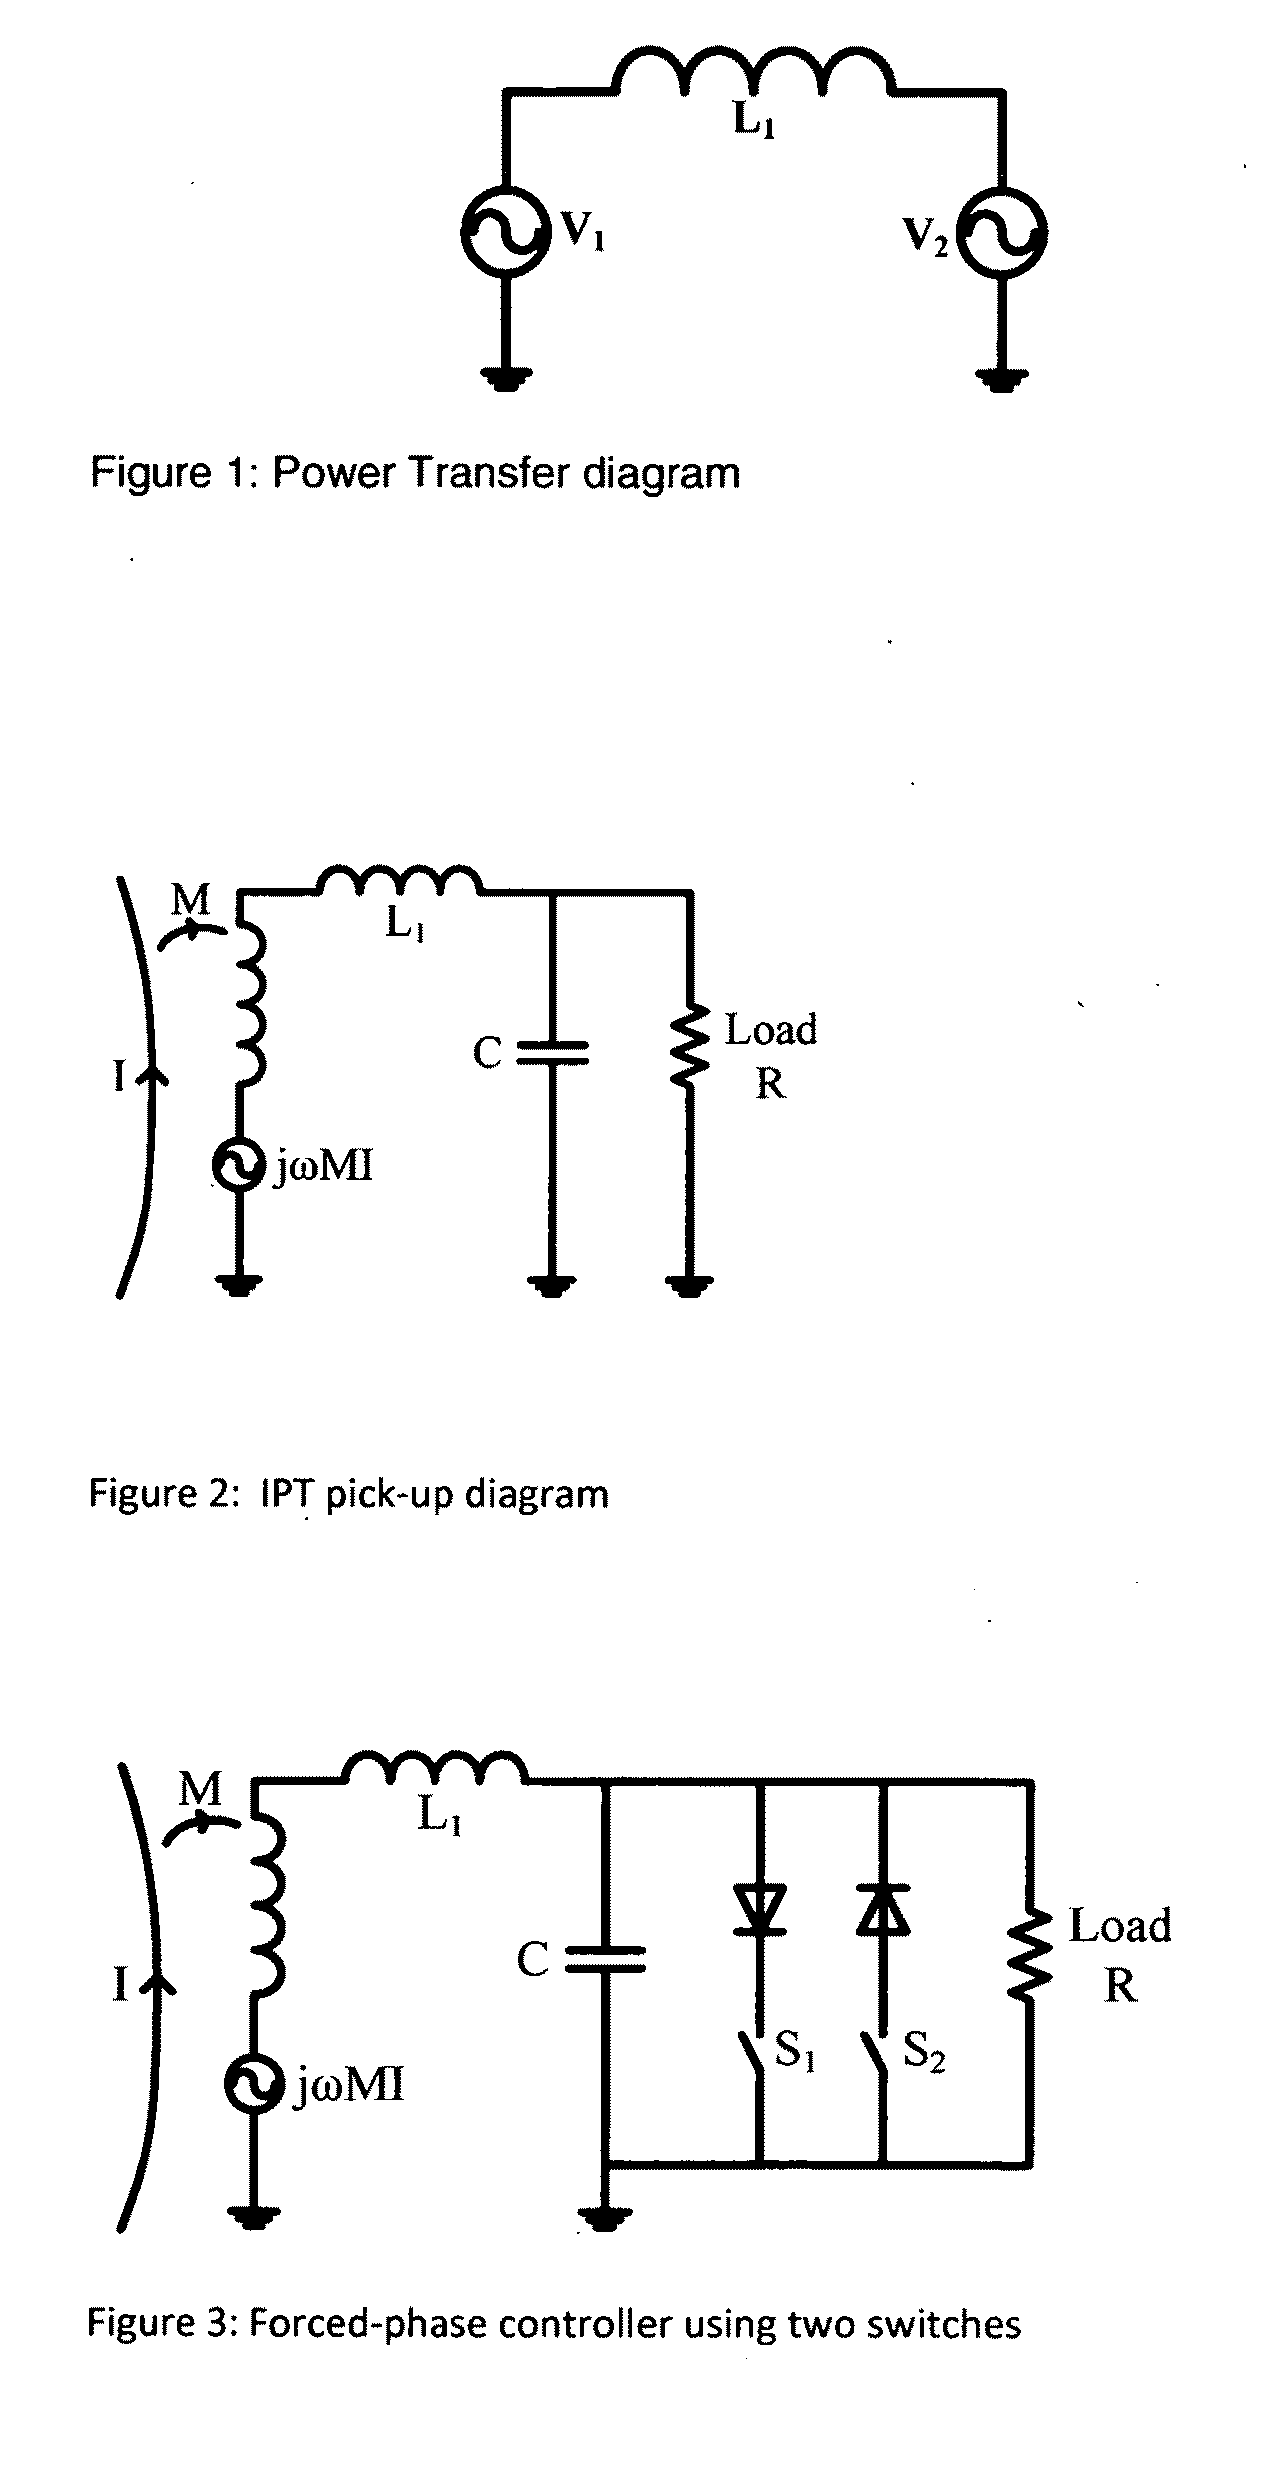 Inductively coupled ac power transfer